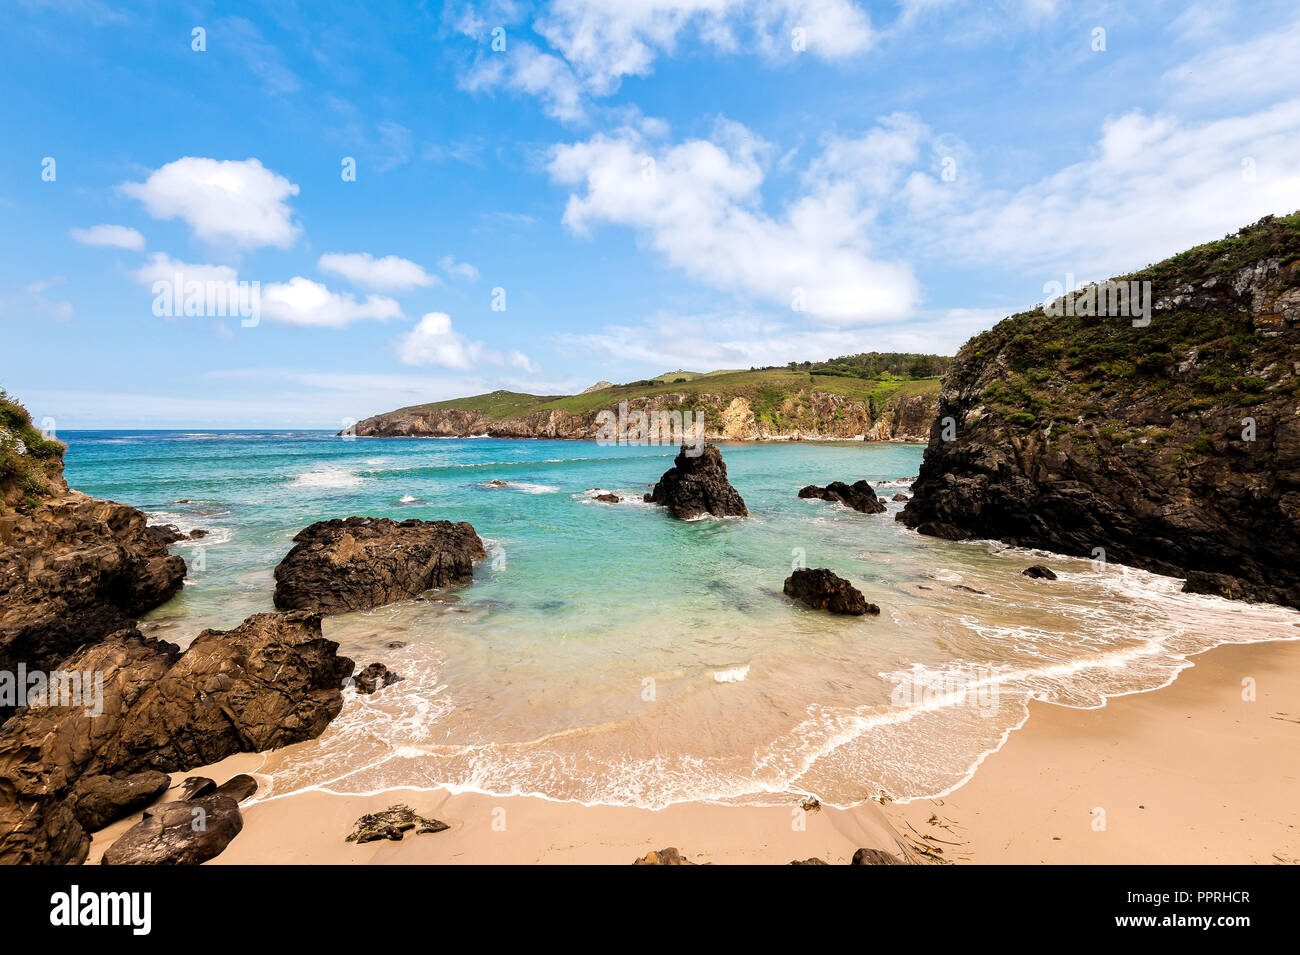 Beauty Atlantic coast with cliff, beach, ocean and sky with clouds. Galicia, Spain. Stock Photo